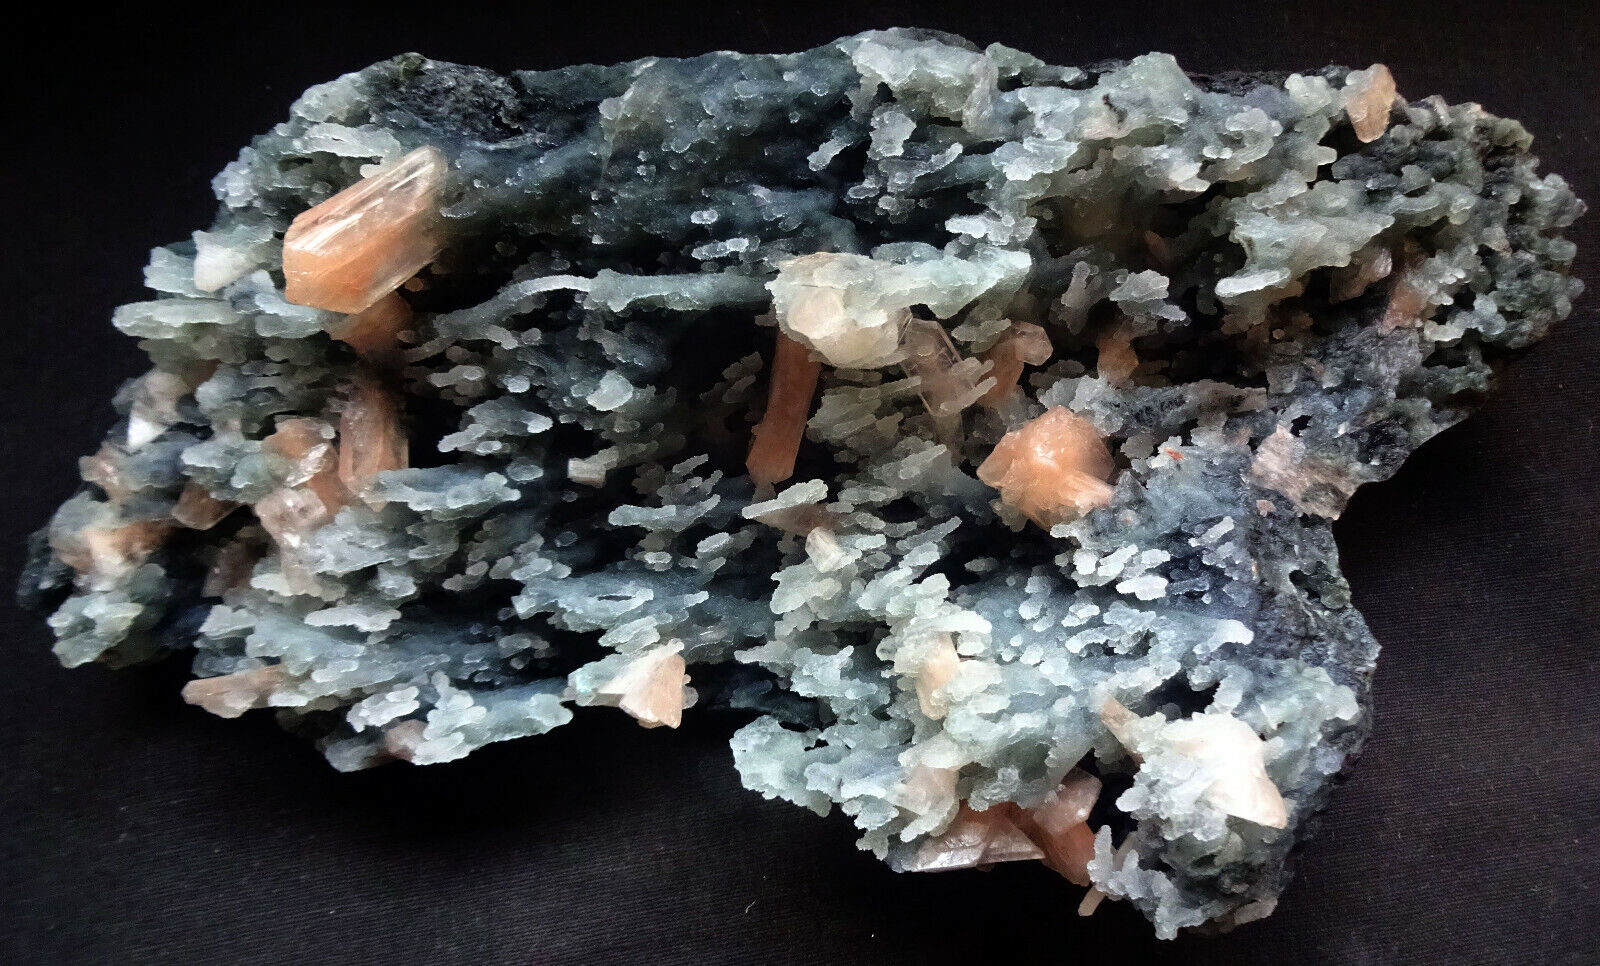 STUNNING STILBITE AND HEULANDITE CRYSTALS ON STALACTITE CORAL CHALCEDONY FORMATI